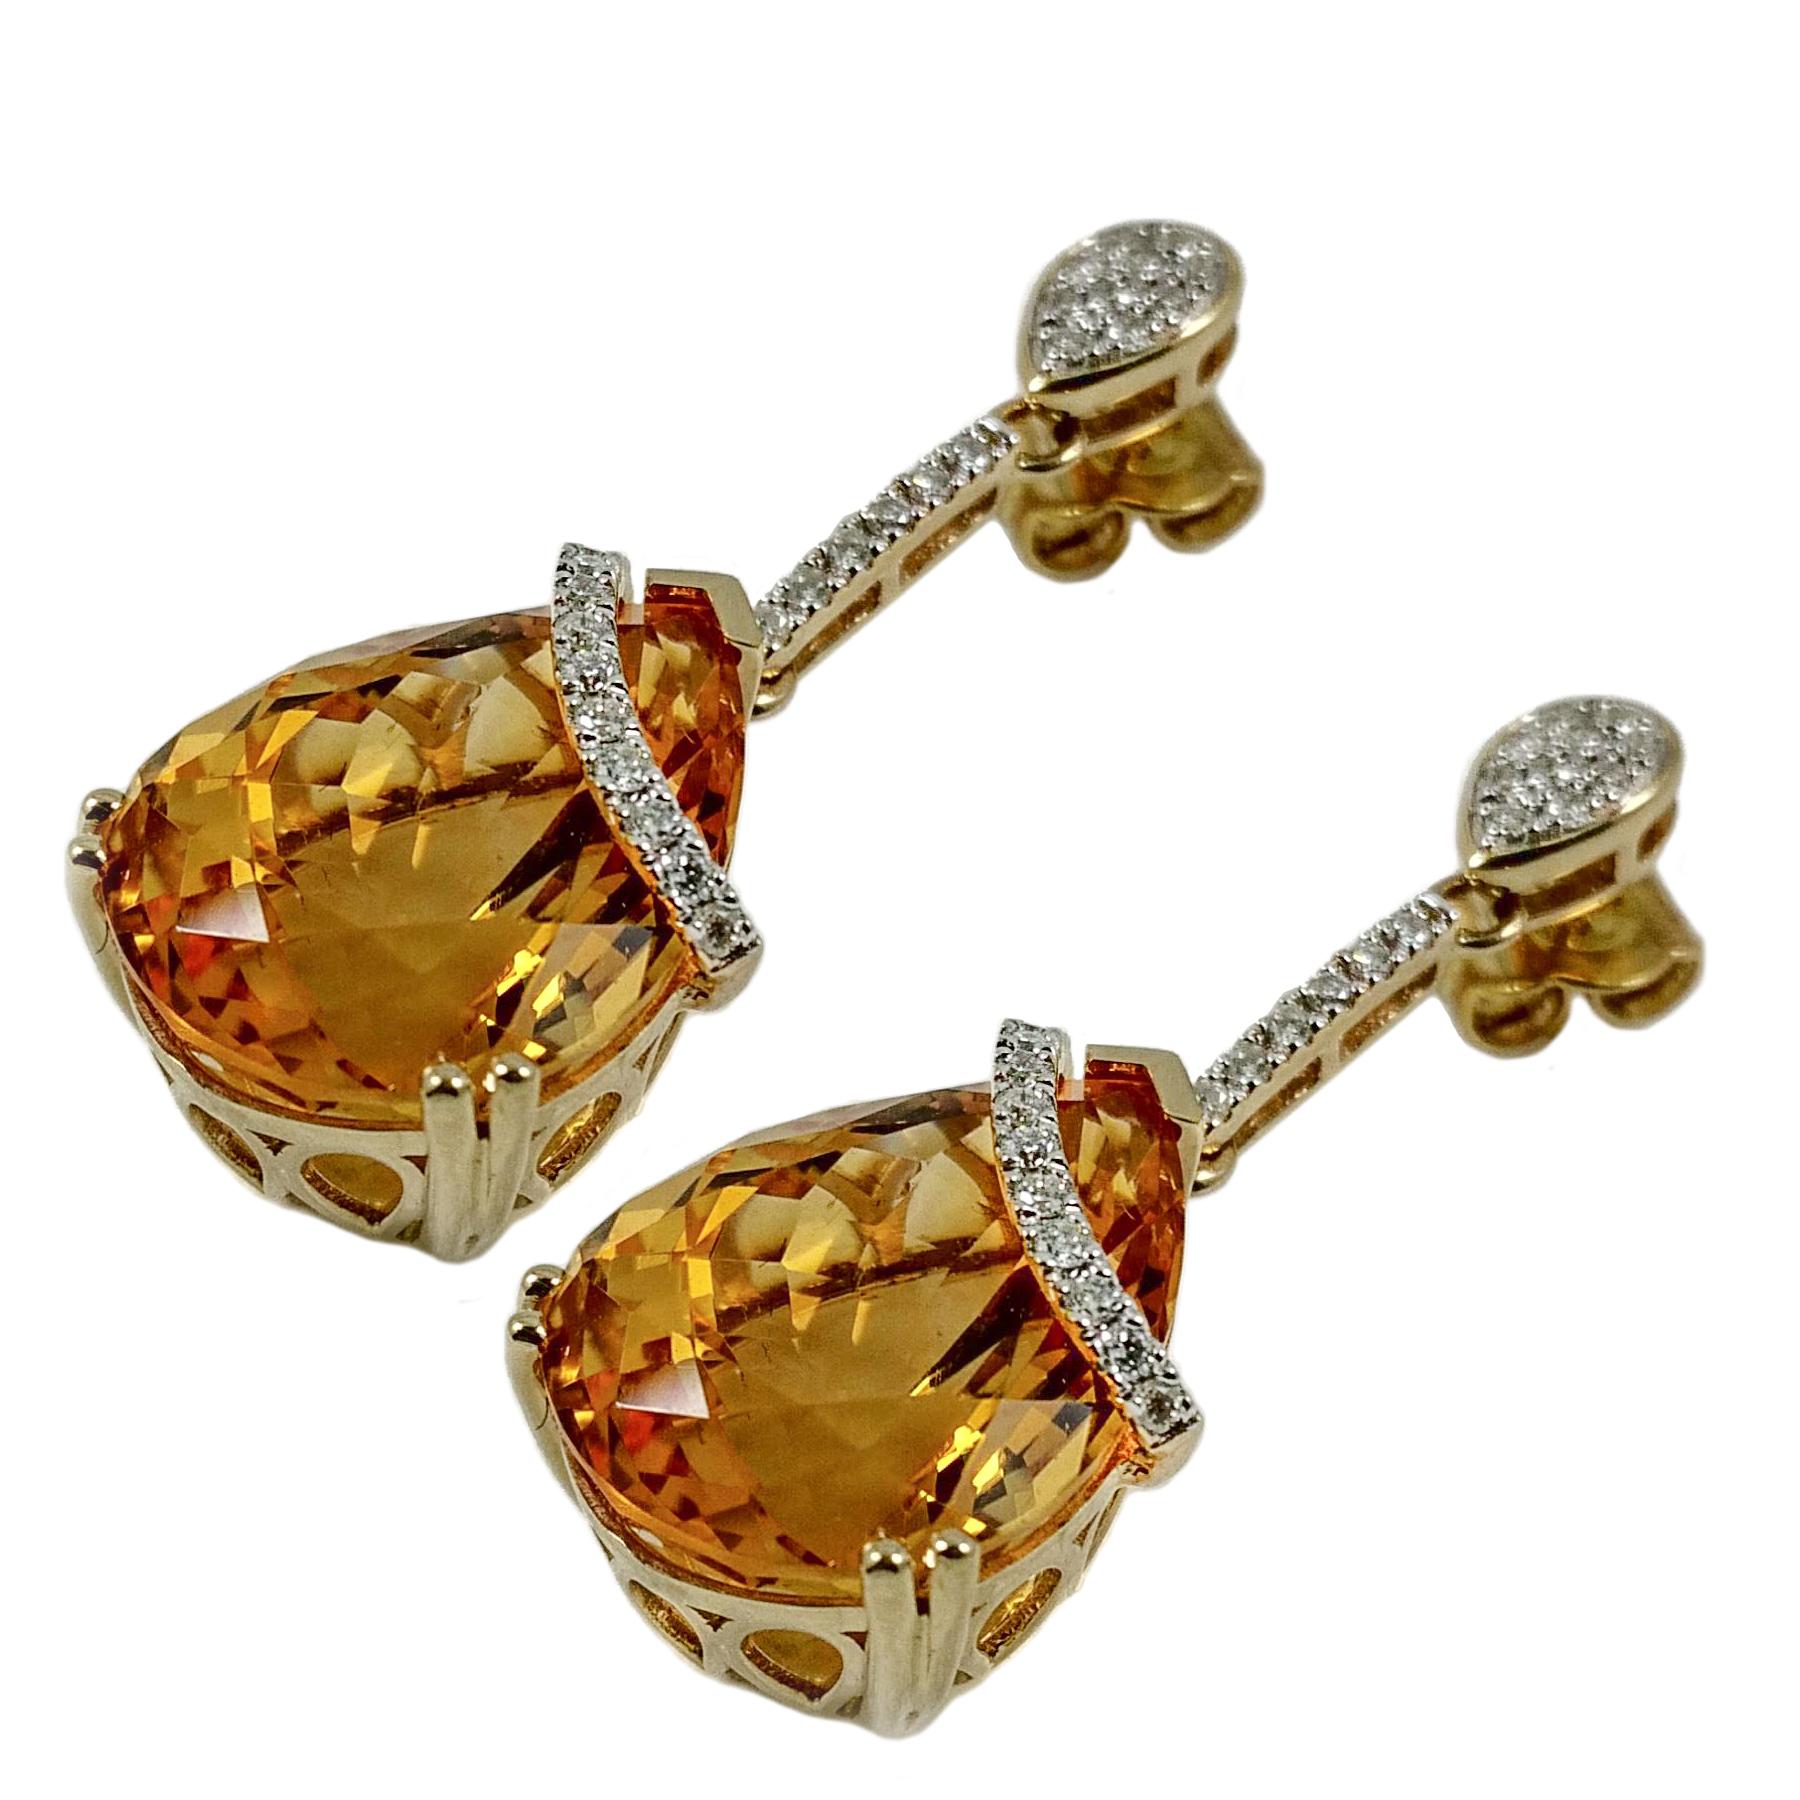 Elegant citrine diamond dangling earrings. Golden honey yellow, high luster, pear faceted 17.93 carats matching citrines, mounted in split prong and bead prongs, encased in basket mounting. Accented with round brilliant cut diamonds row across two